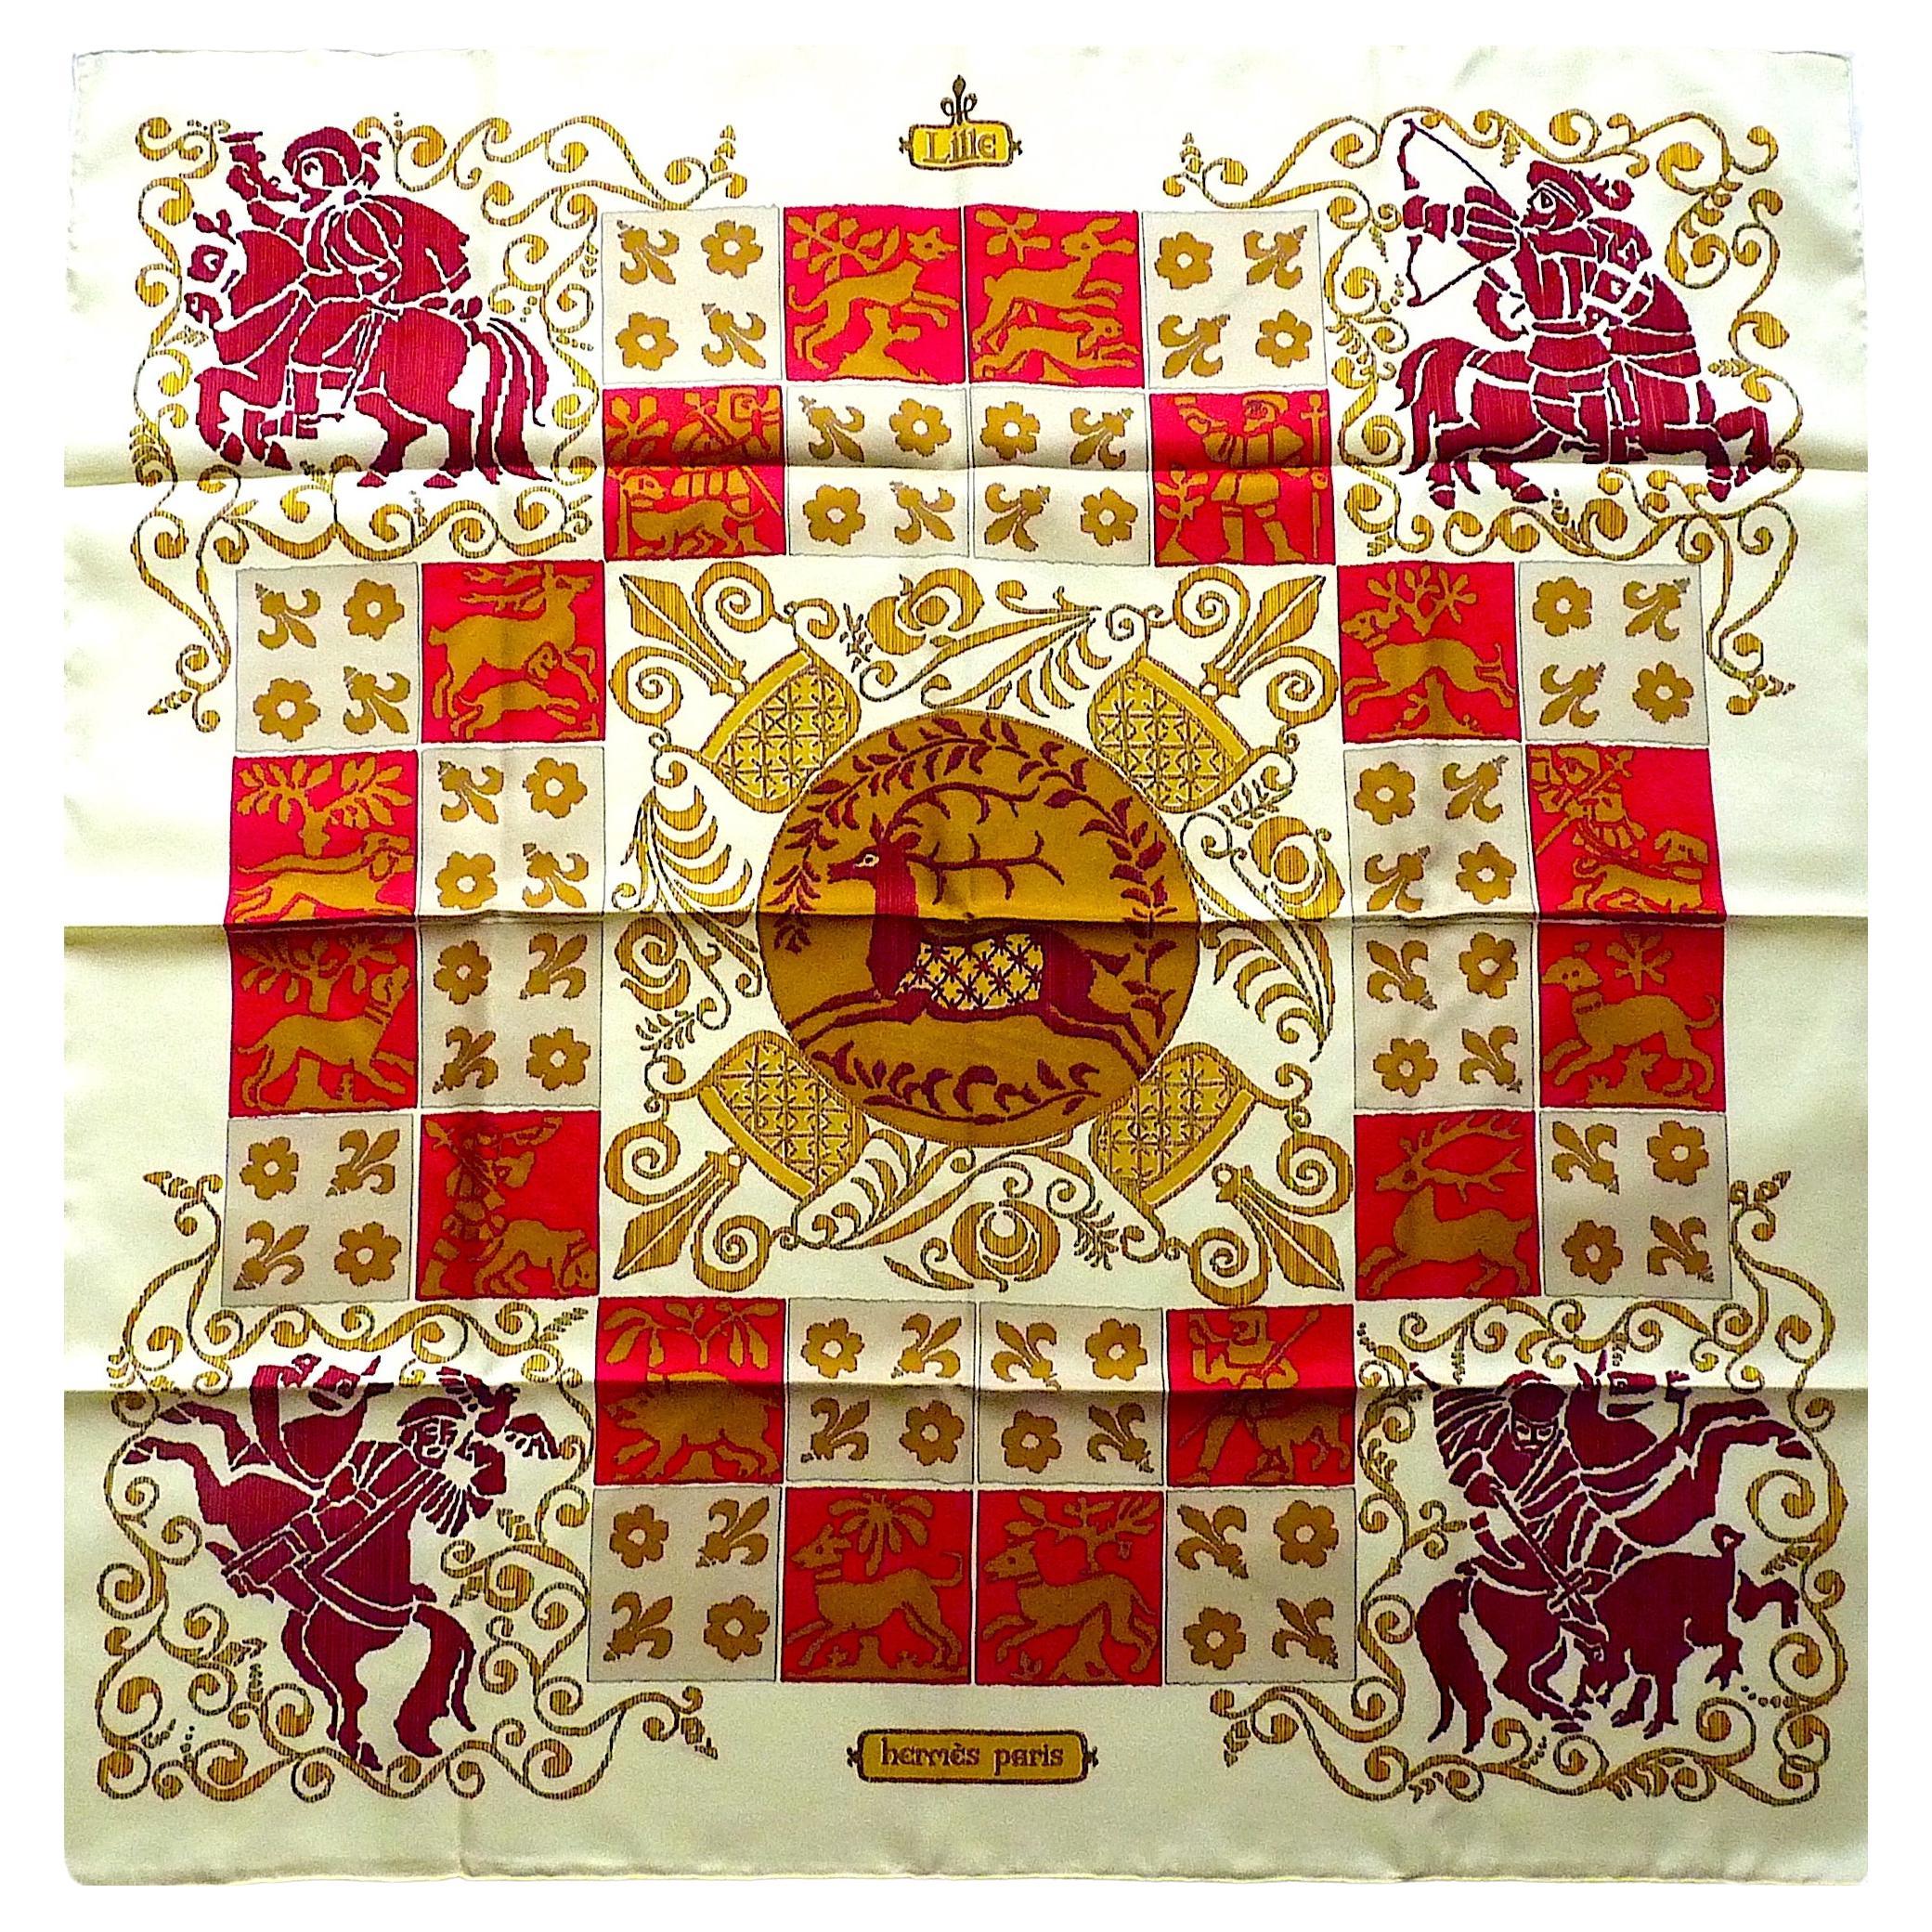 HERMES Silk Scarf Hourvari by Henri D'Origny, this is a Special Edition for Opening of the Hermès store in Lille in the late 1990s. Ultra Rare and Highly Collectible ! The name of the city of Lille is written in a cartouche on the upper side of the